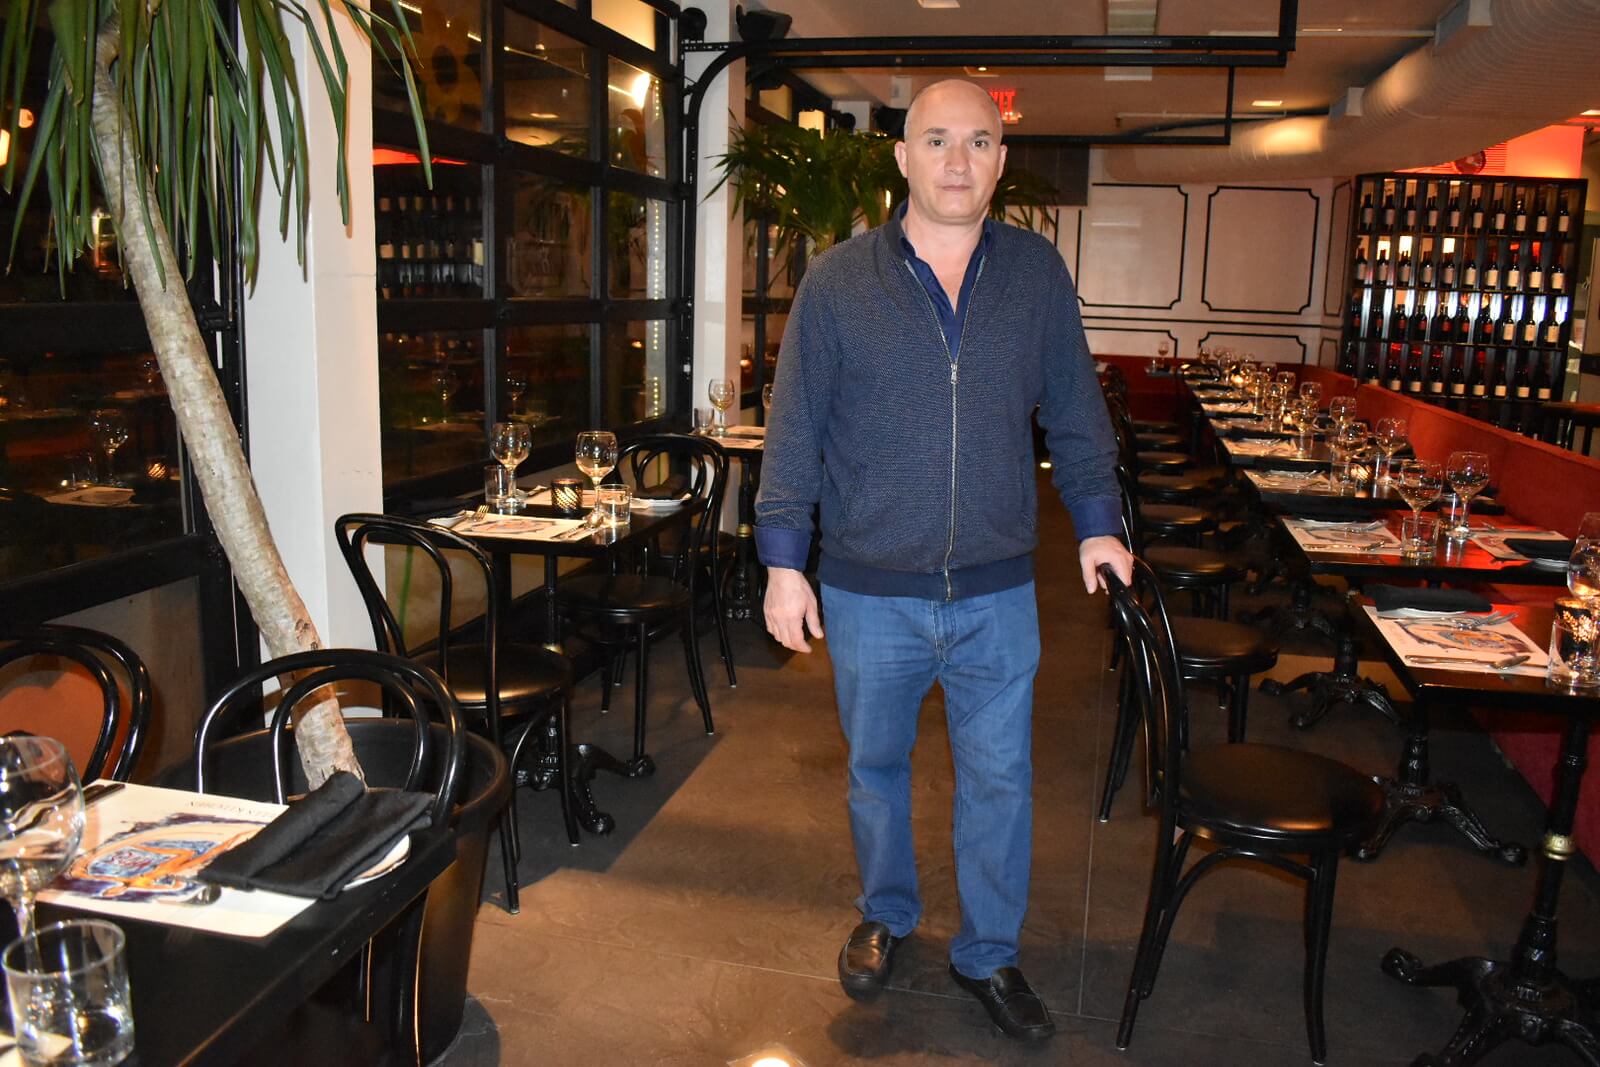 Man standing in restaurant with rows of tables and chairs on either side